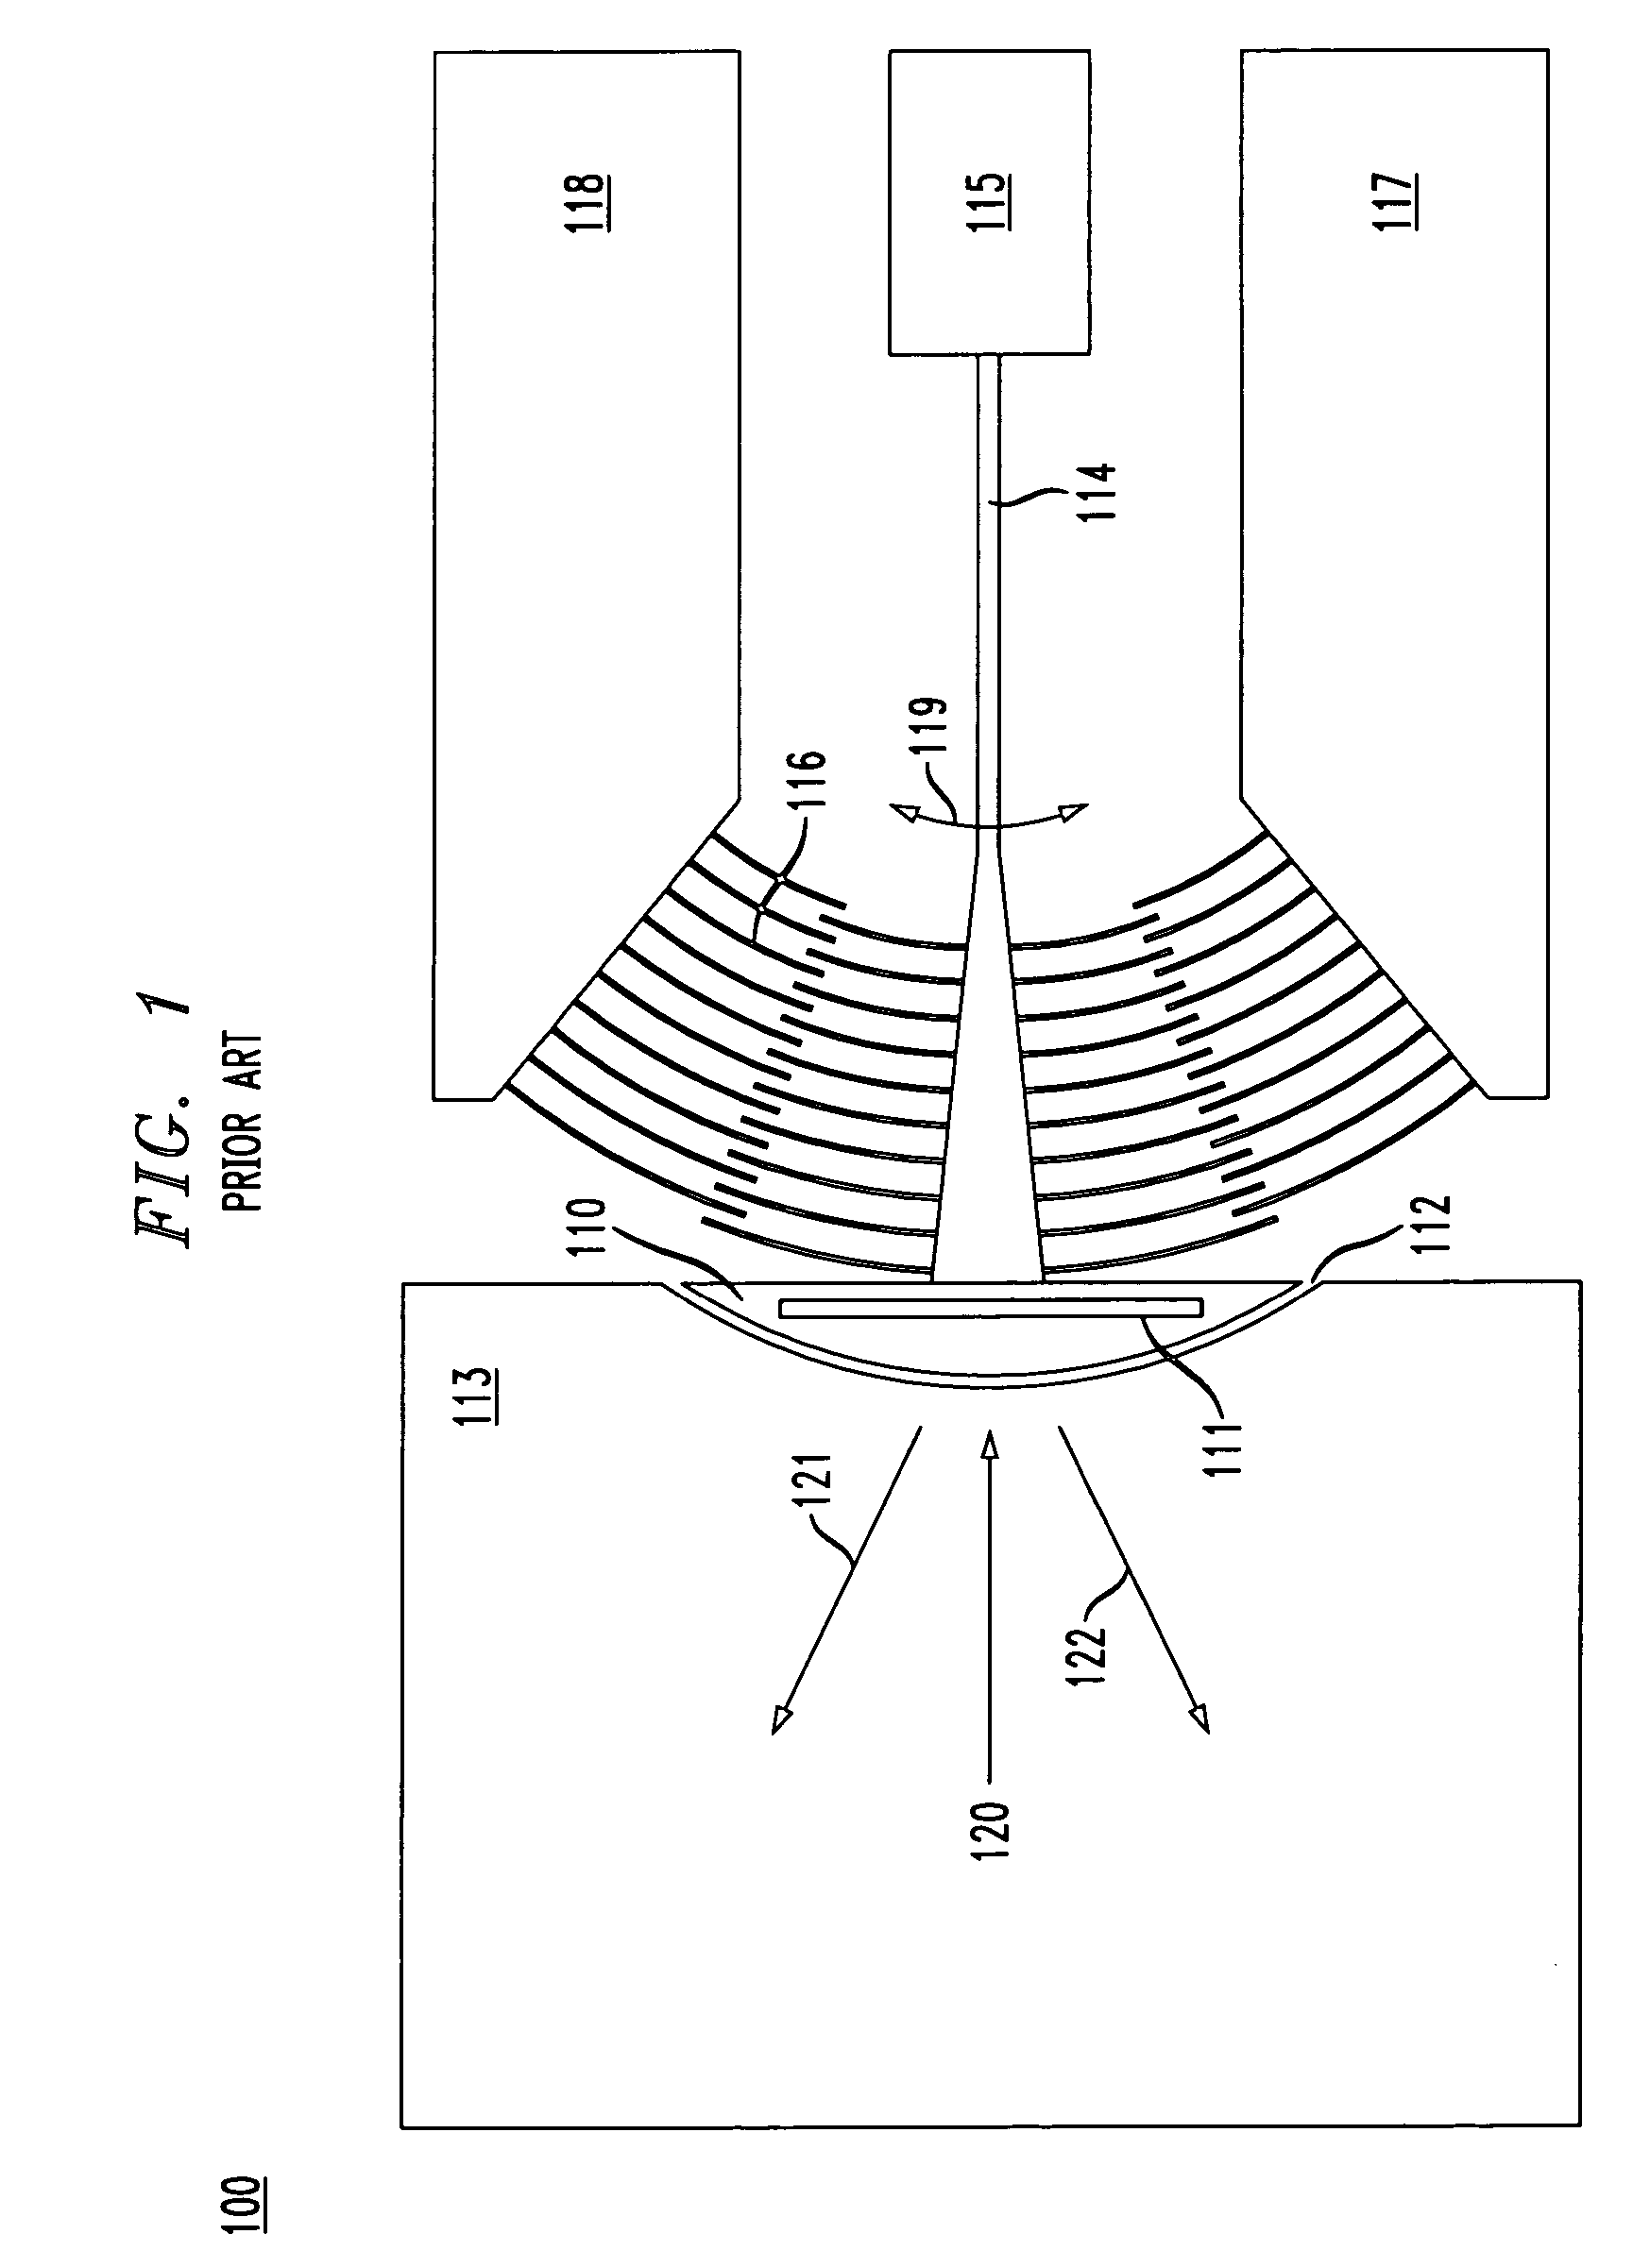 Integrated microelectromechanical wavelength selective switch and method of making same